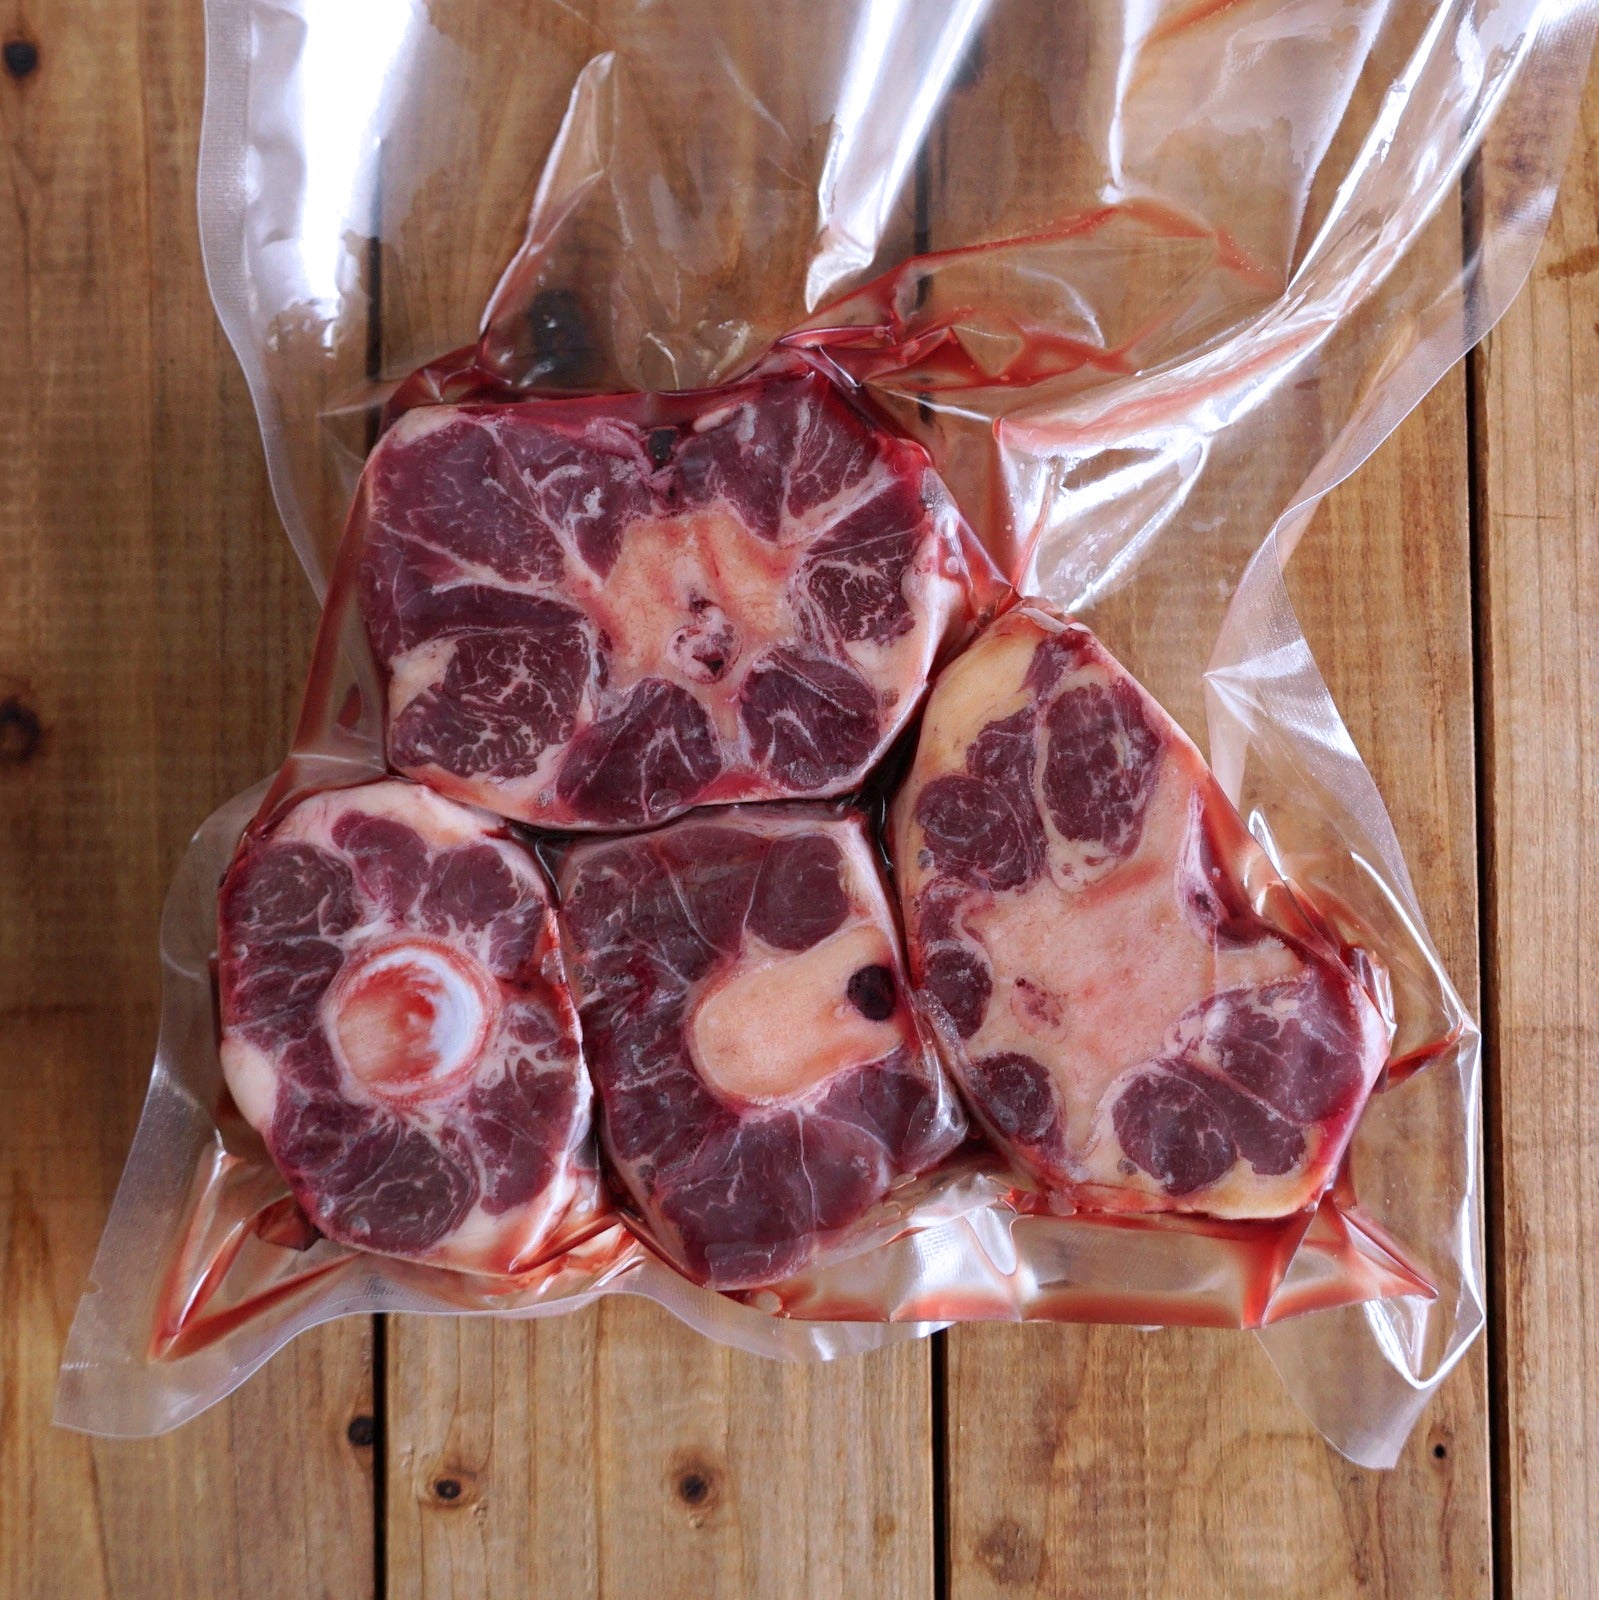 Grass-Fed Beef Oxtail / Tail Cuts (500g) - Horizon Farms